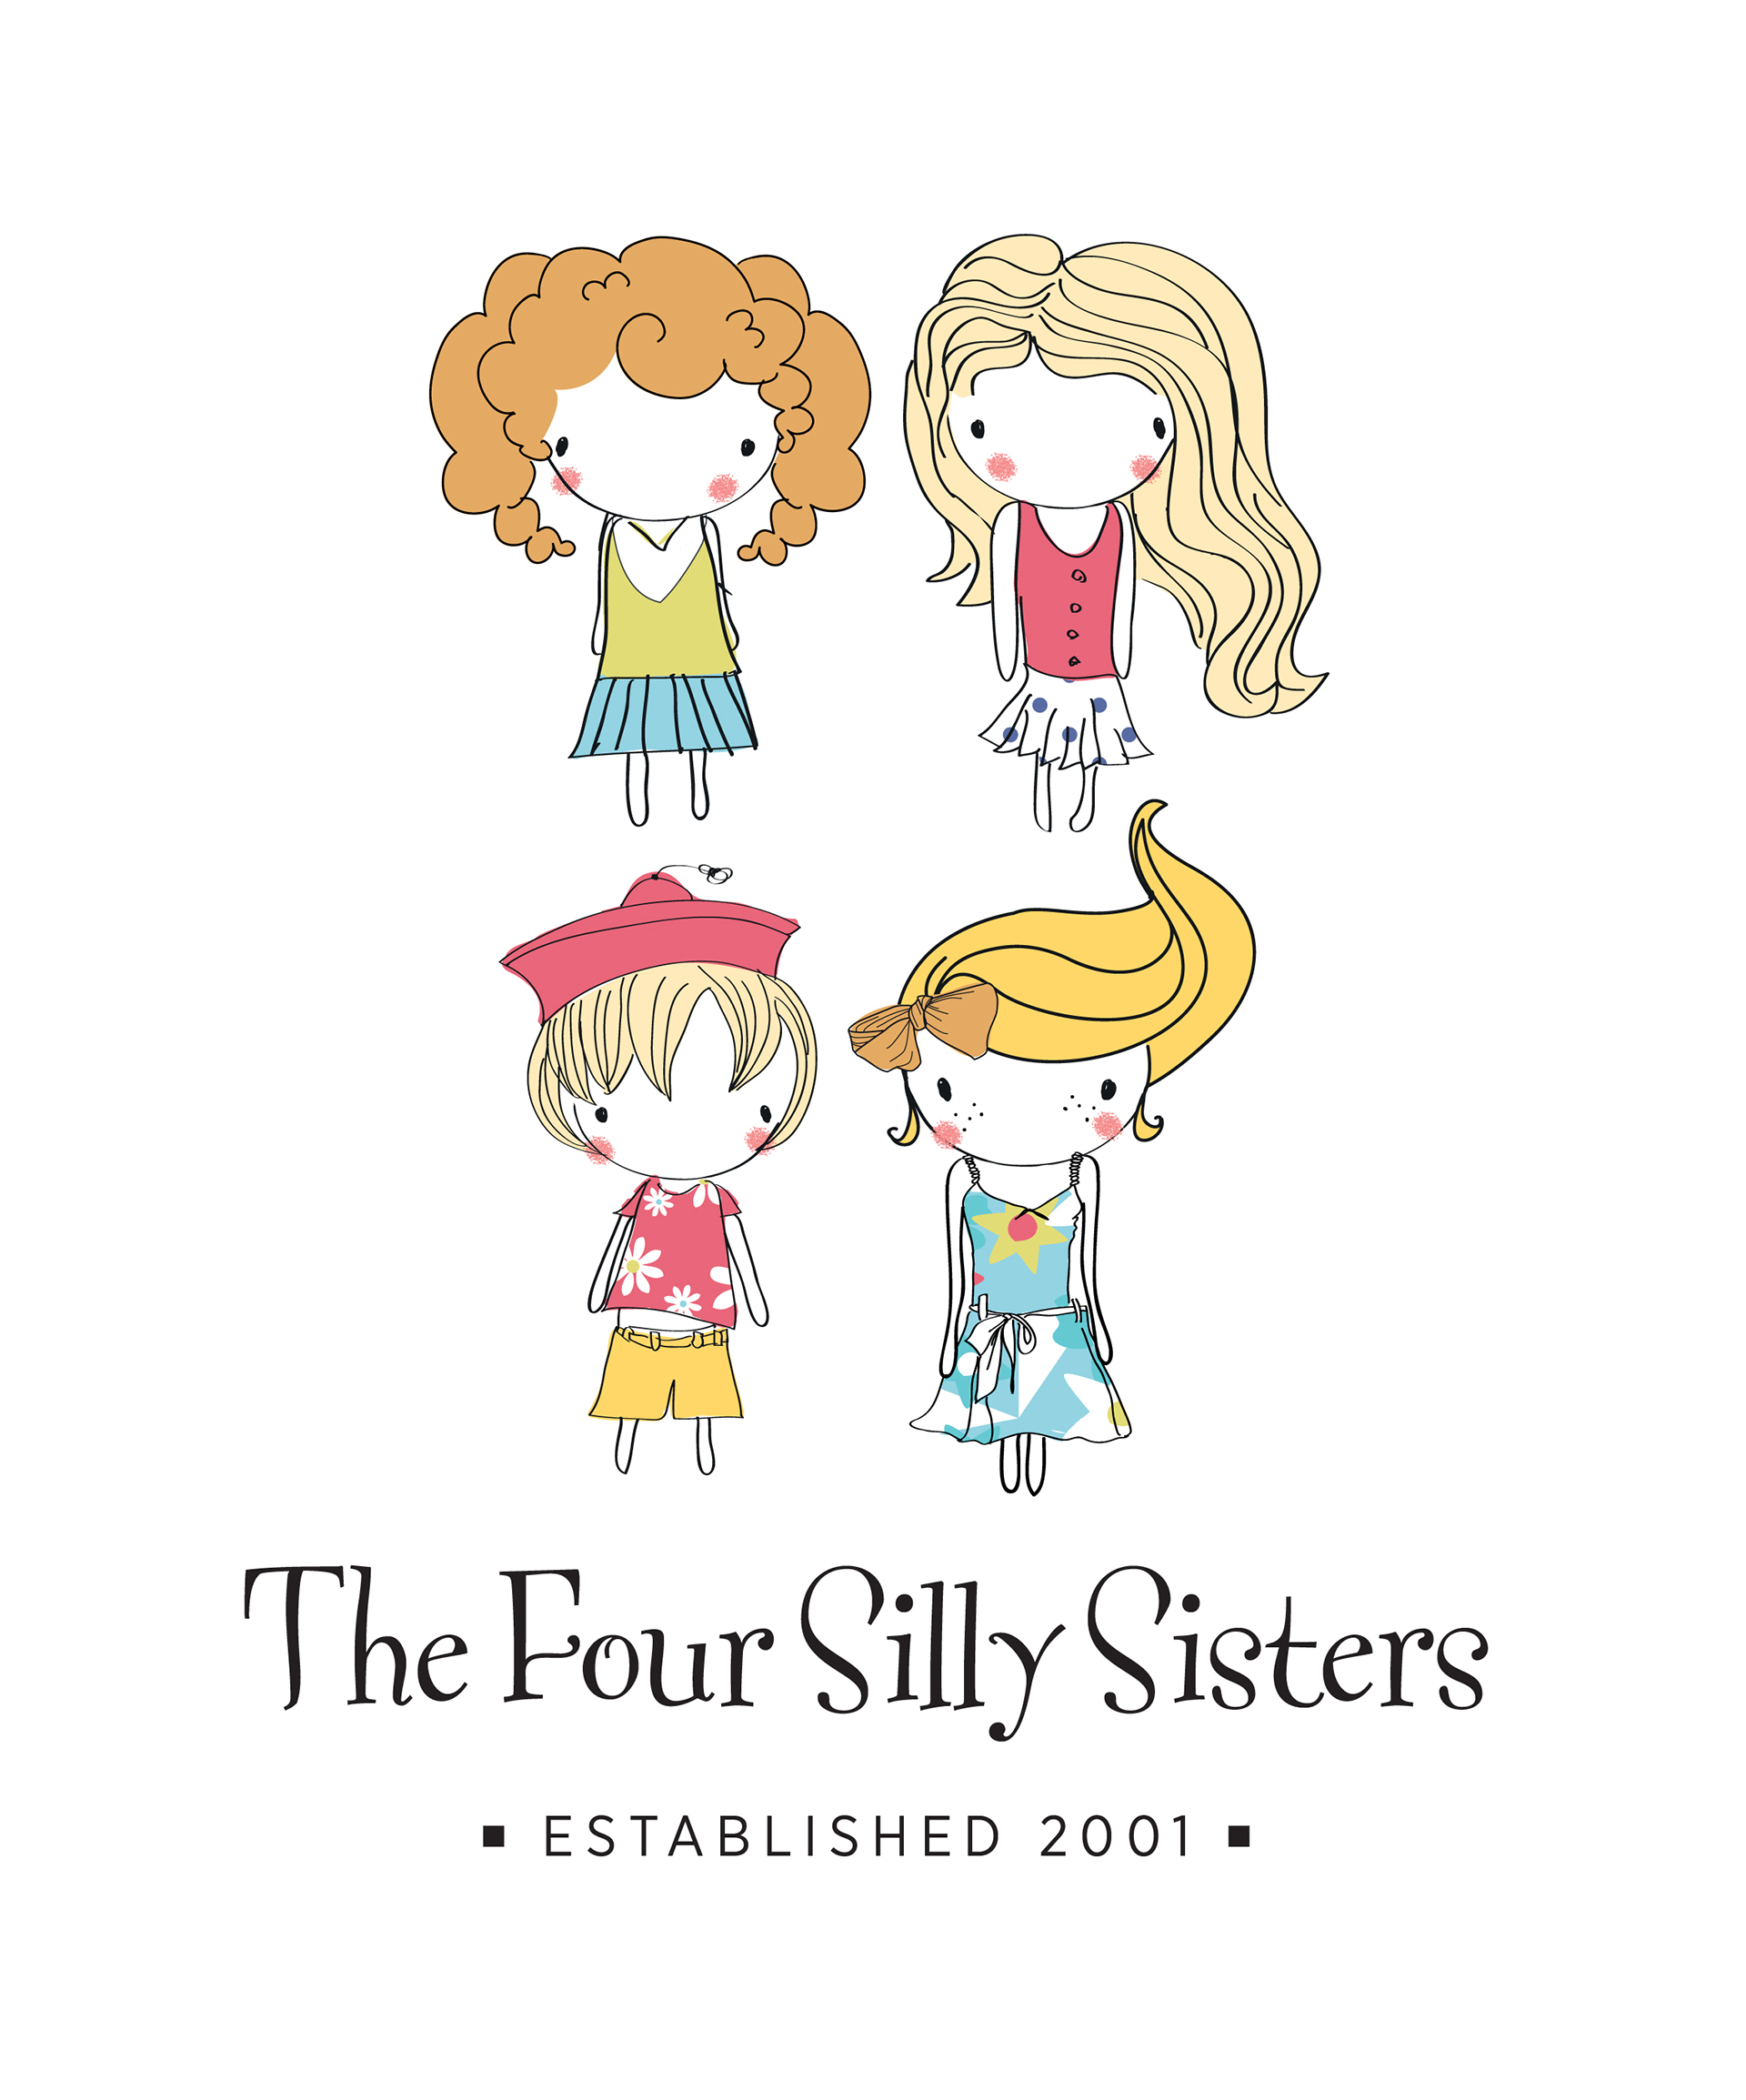 The Four Silly Sisters on Behance